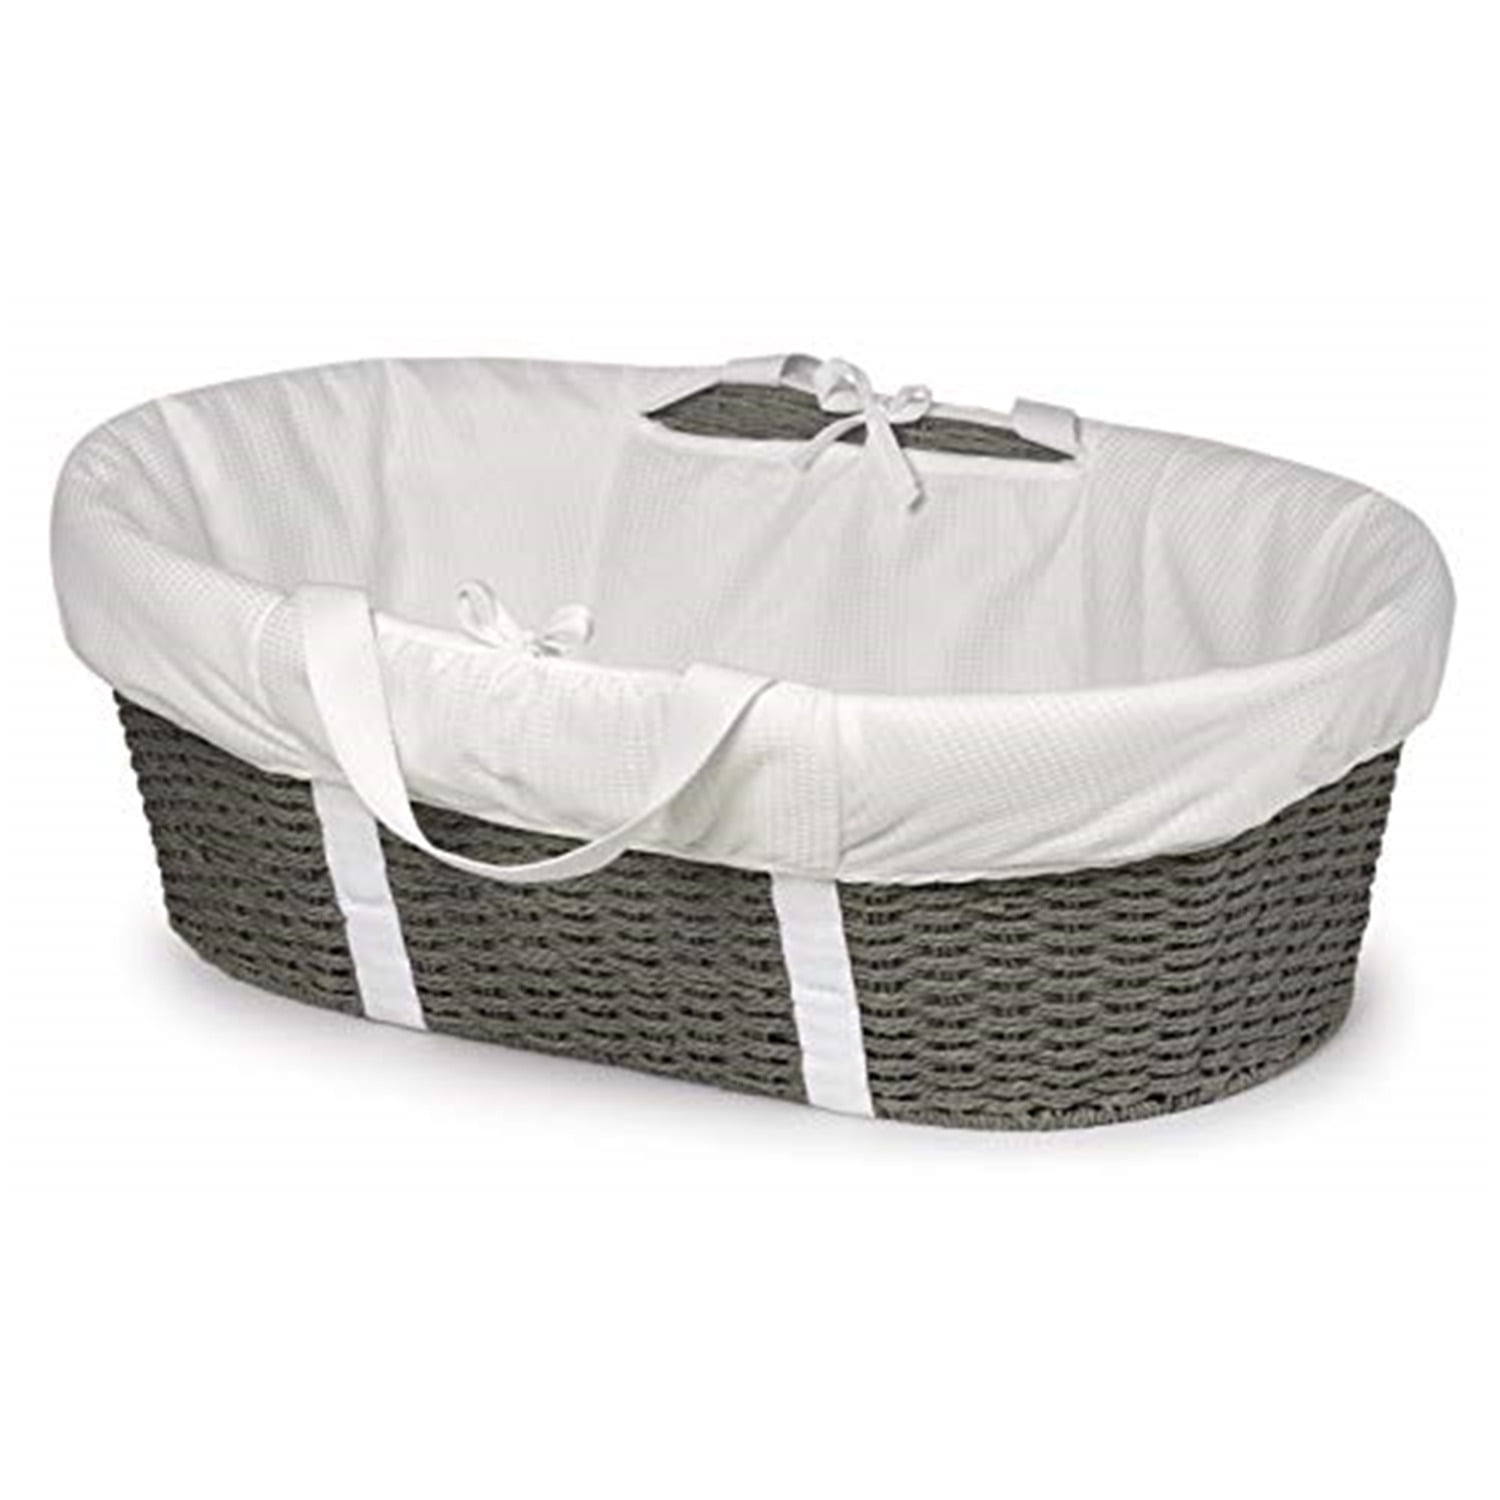 Select Elegant wicker bassinet with stand at Affordable Prices 